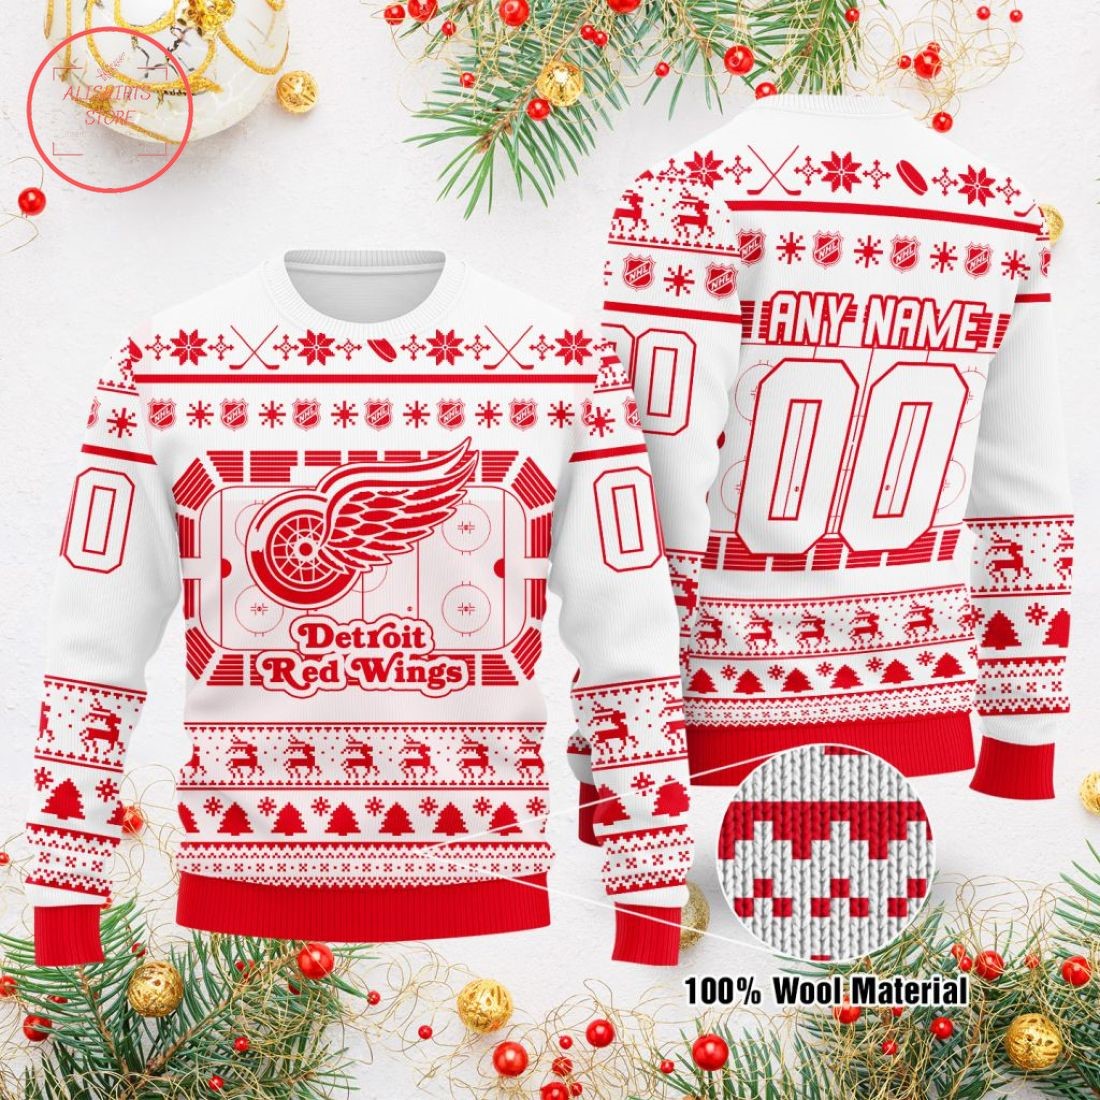 Detroit Red Wings Ugly Christmas Sweater Women's V-Neck